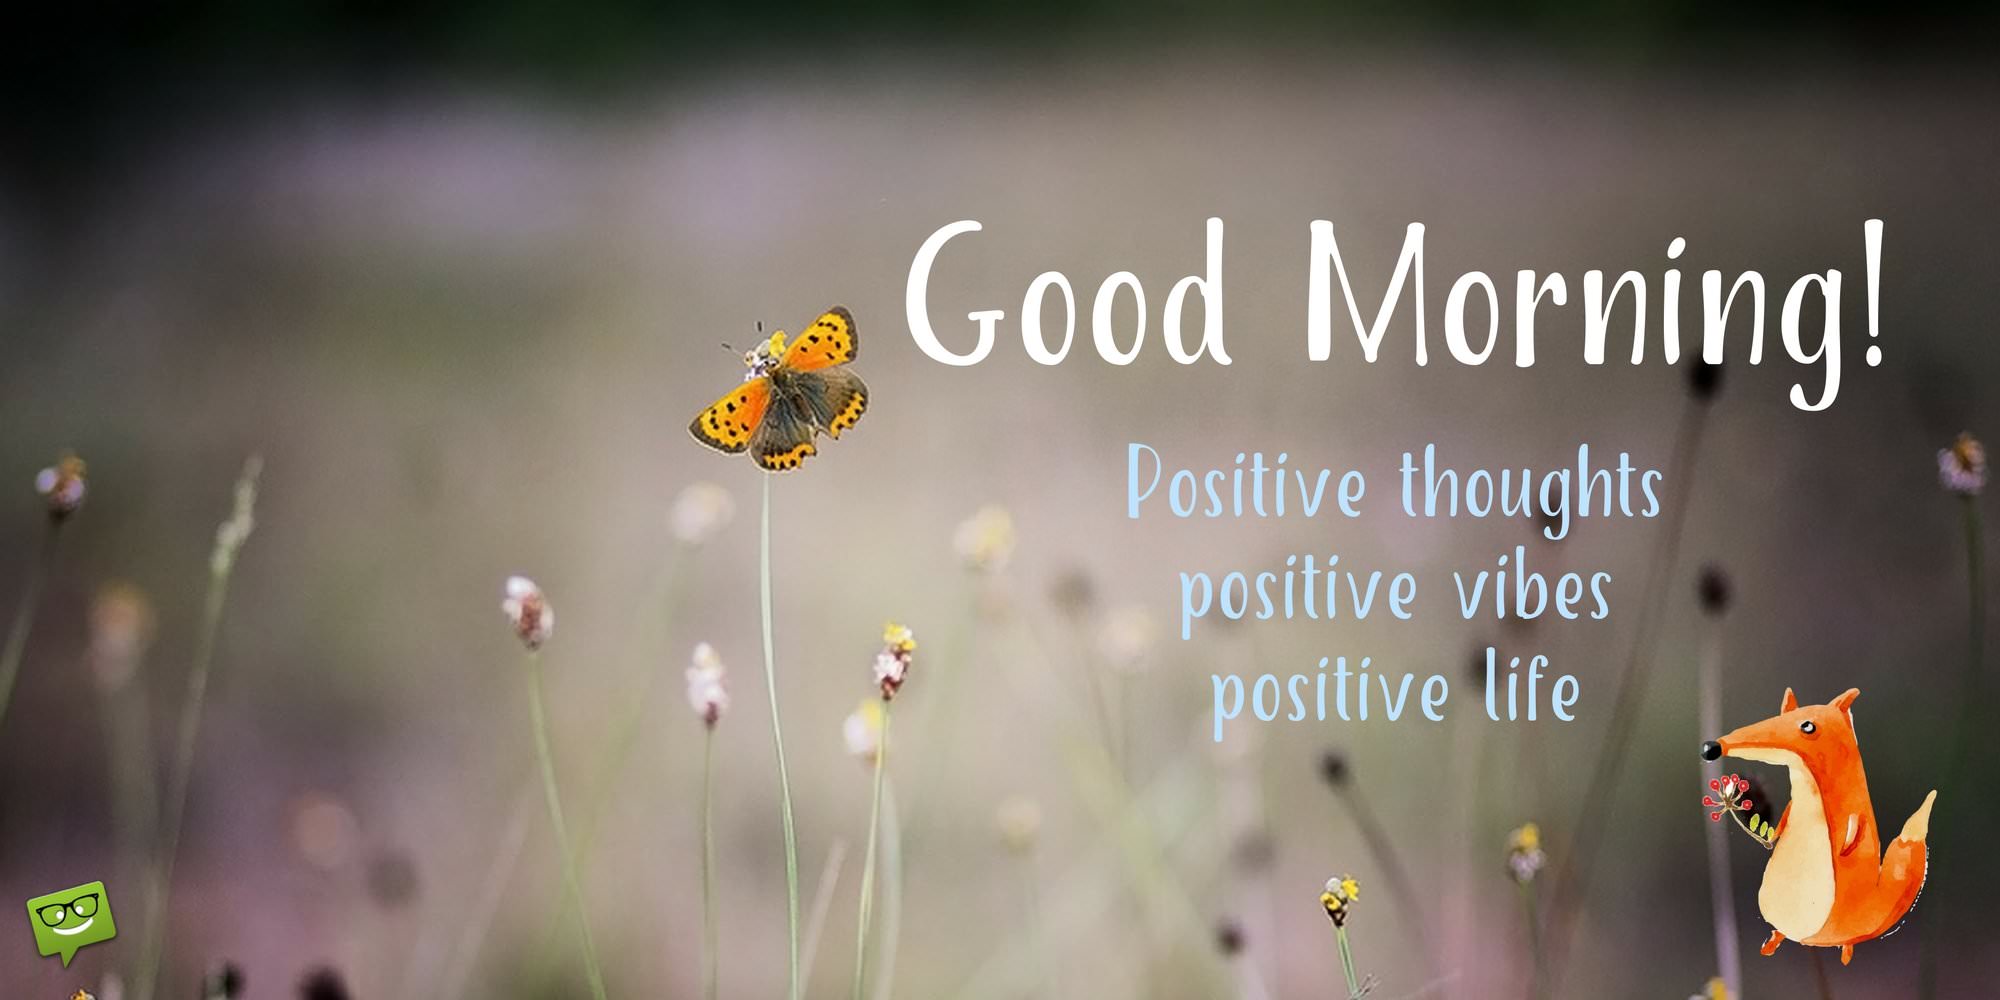 Good Morning Positive Thoughts - Thought Positive Good Morning , HD Wallpaper & Backgrounds